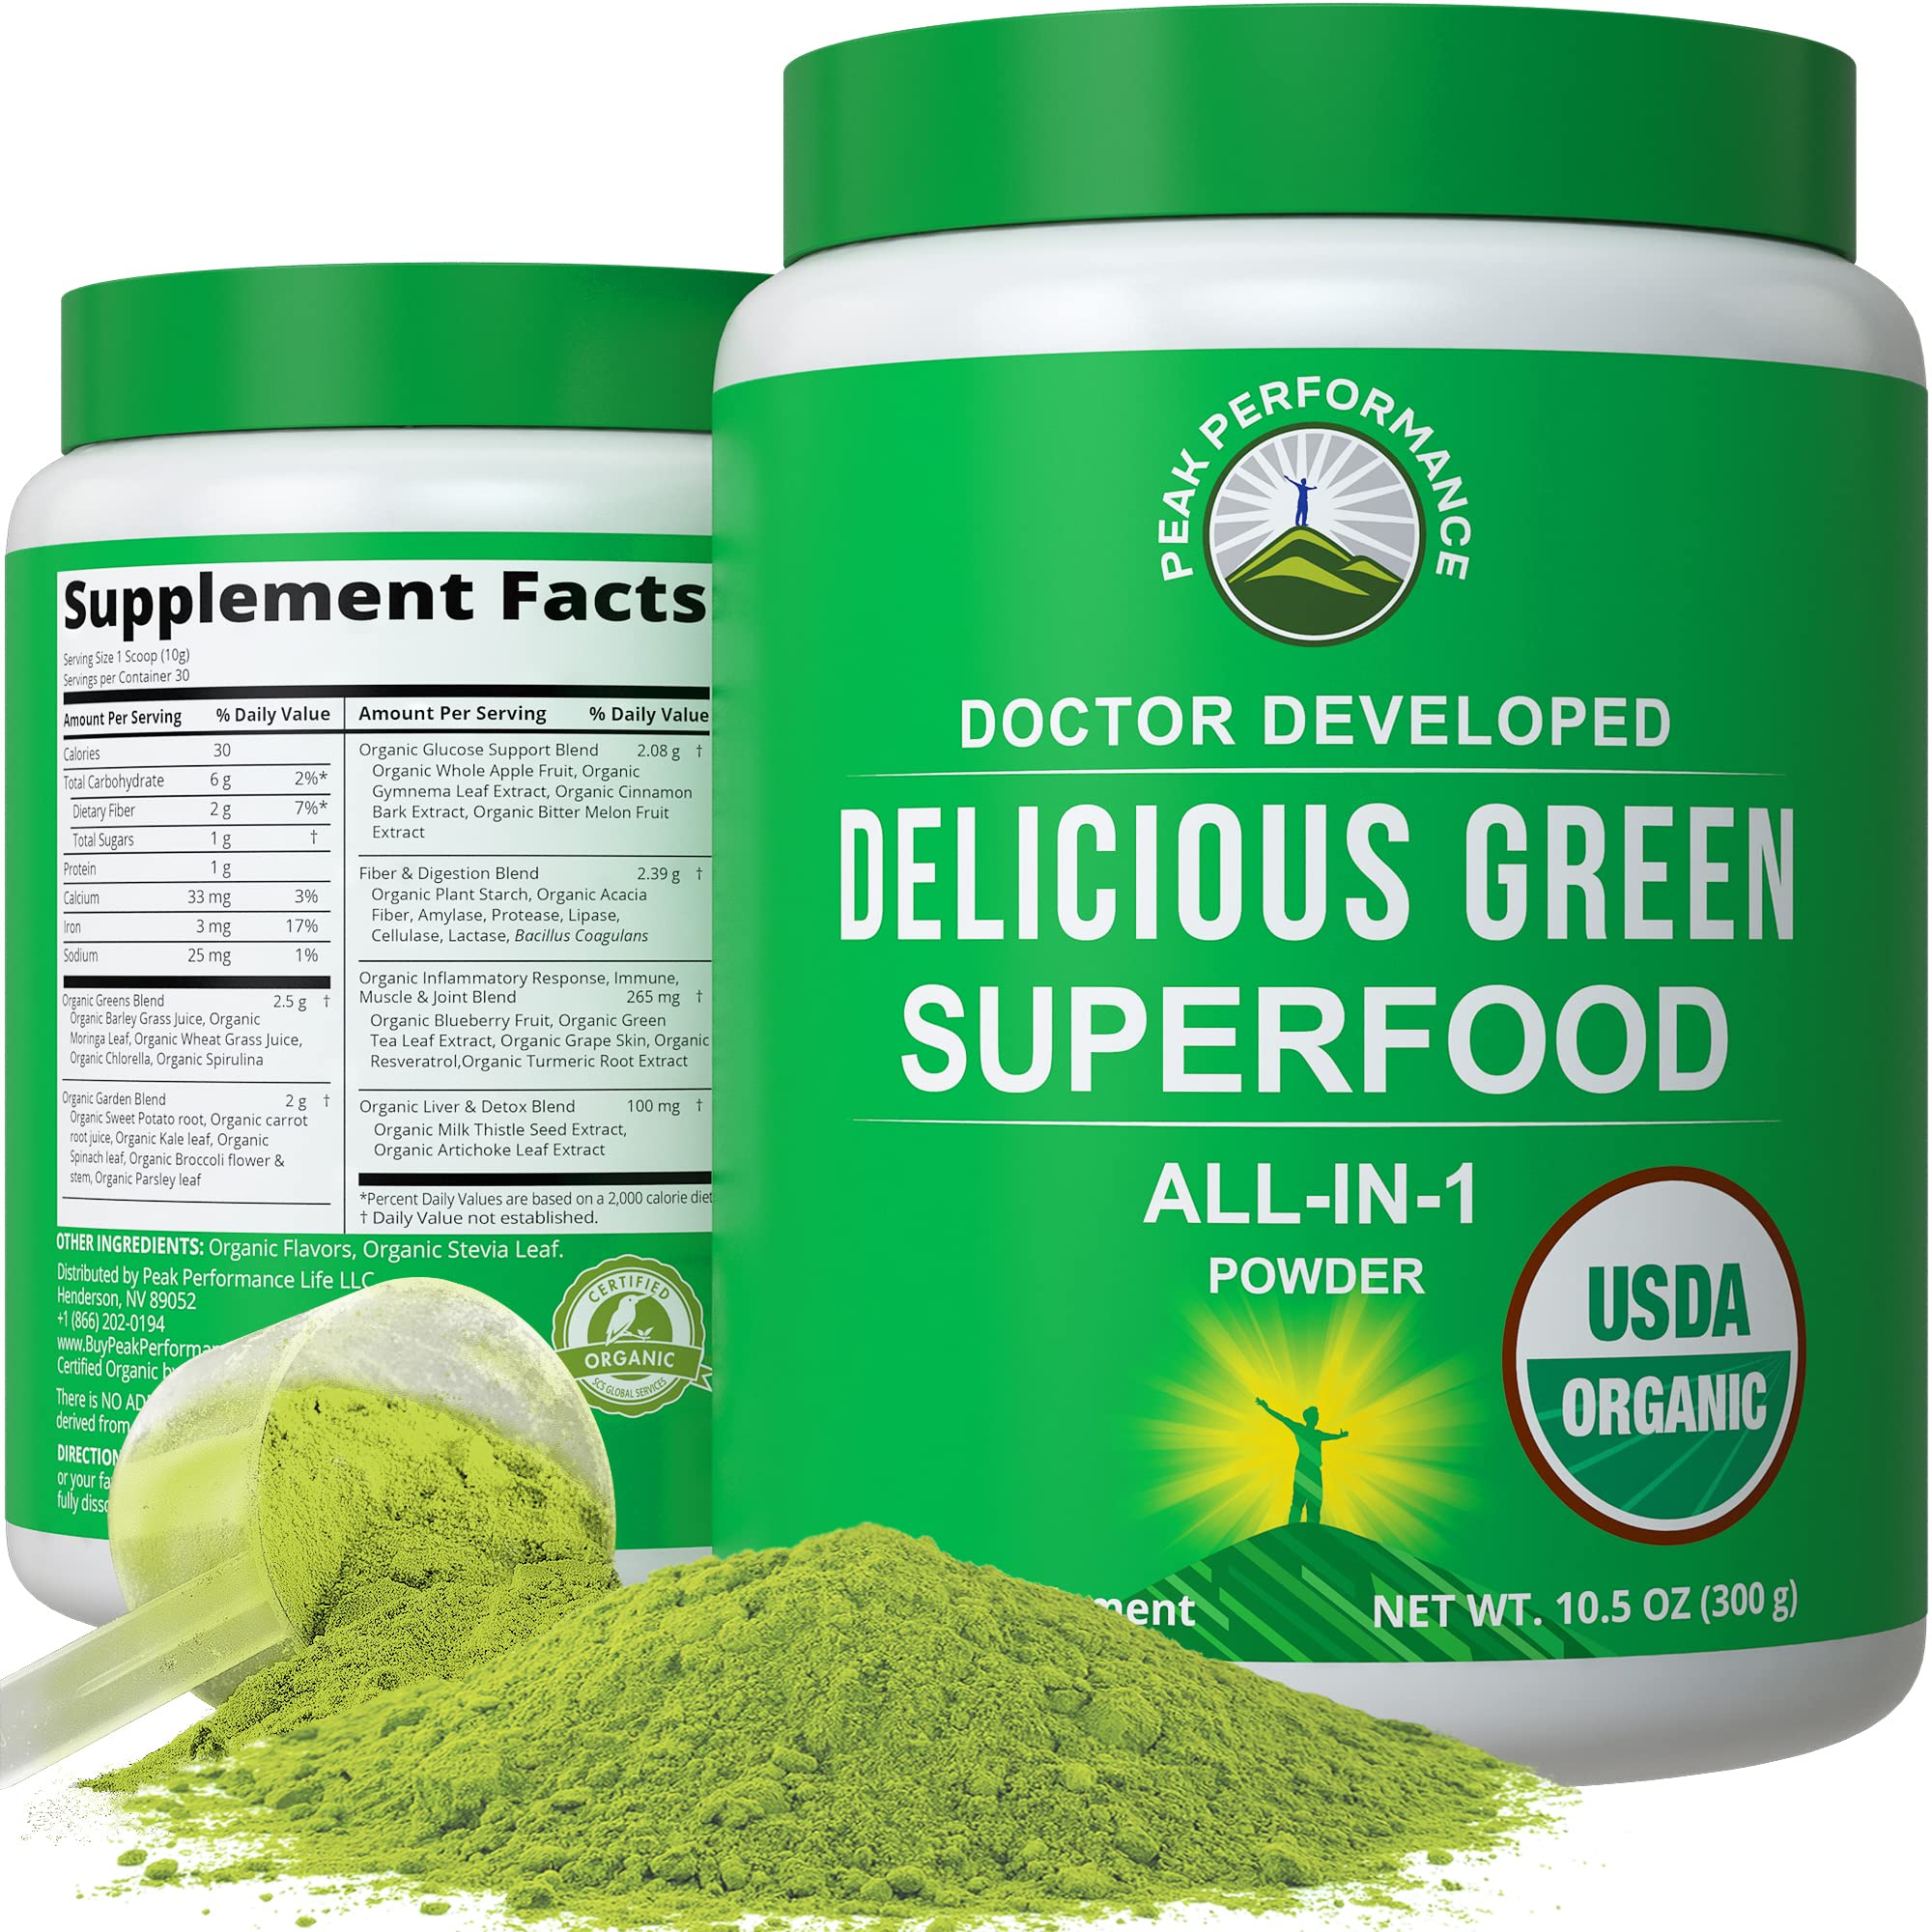 Book Cover Peak Performance Organic Greens Superfood Powder. Best Tasting Super Greens Powder with 25+ Organic Ingredients for Max Energy and Athletic Performance. Vegan Keto Green Juice Daily Drink Original Greens